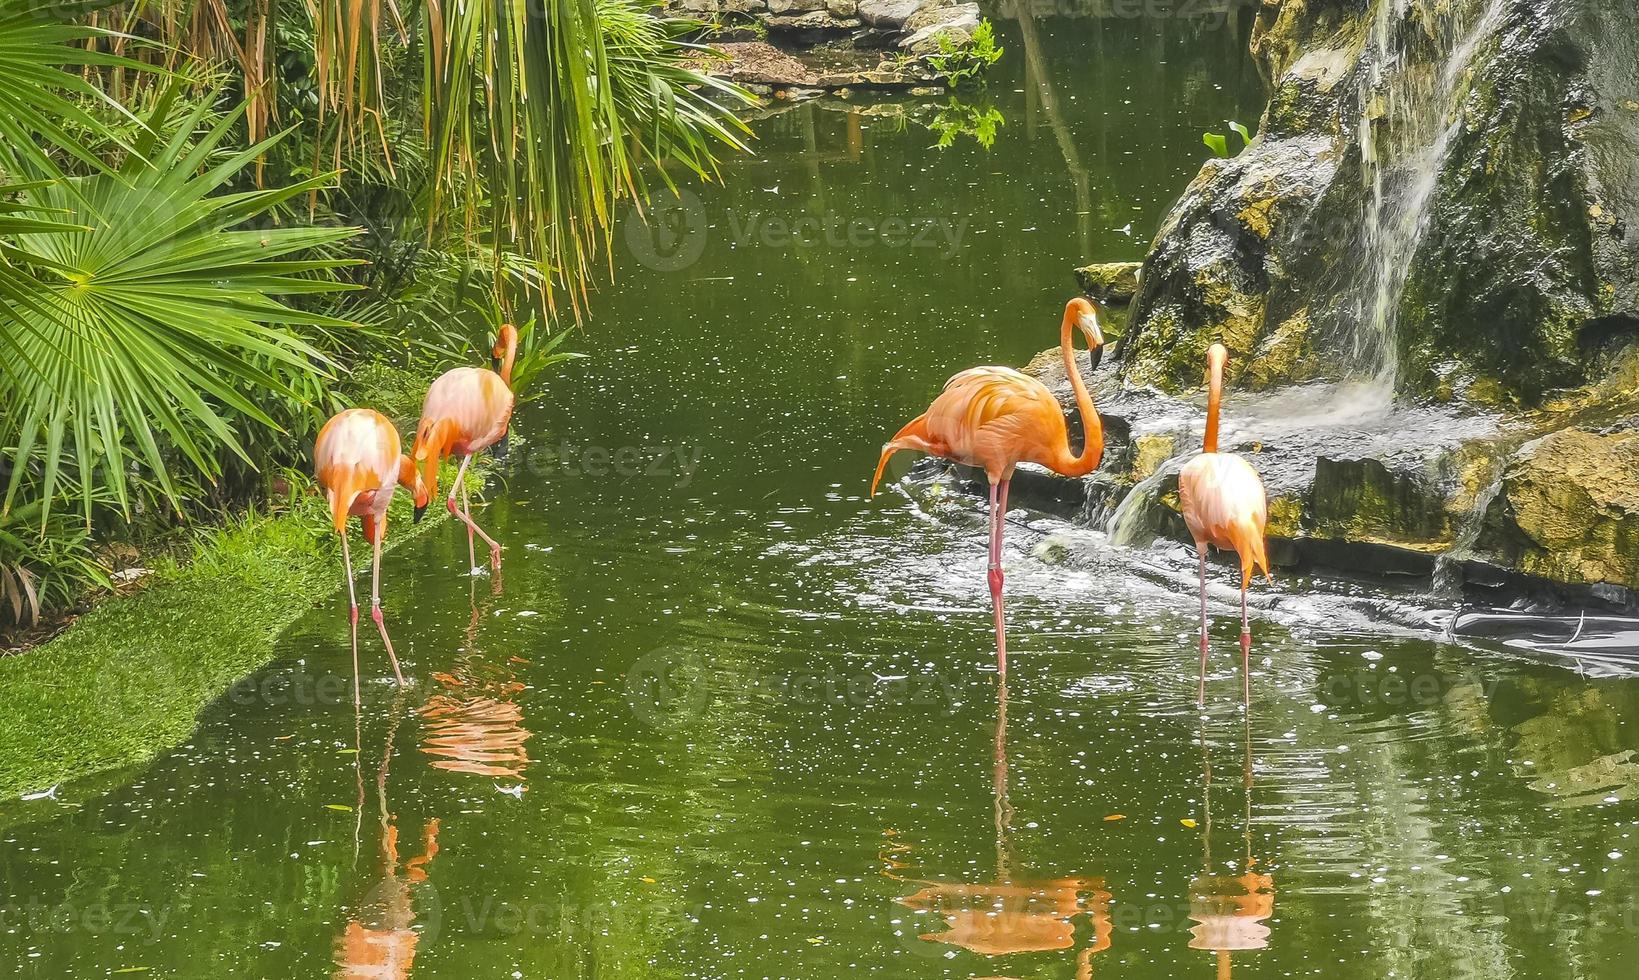 Pink flamingos in pond lake in luxury resort in Mexico. photo